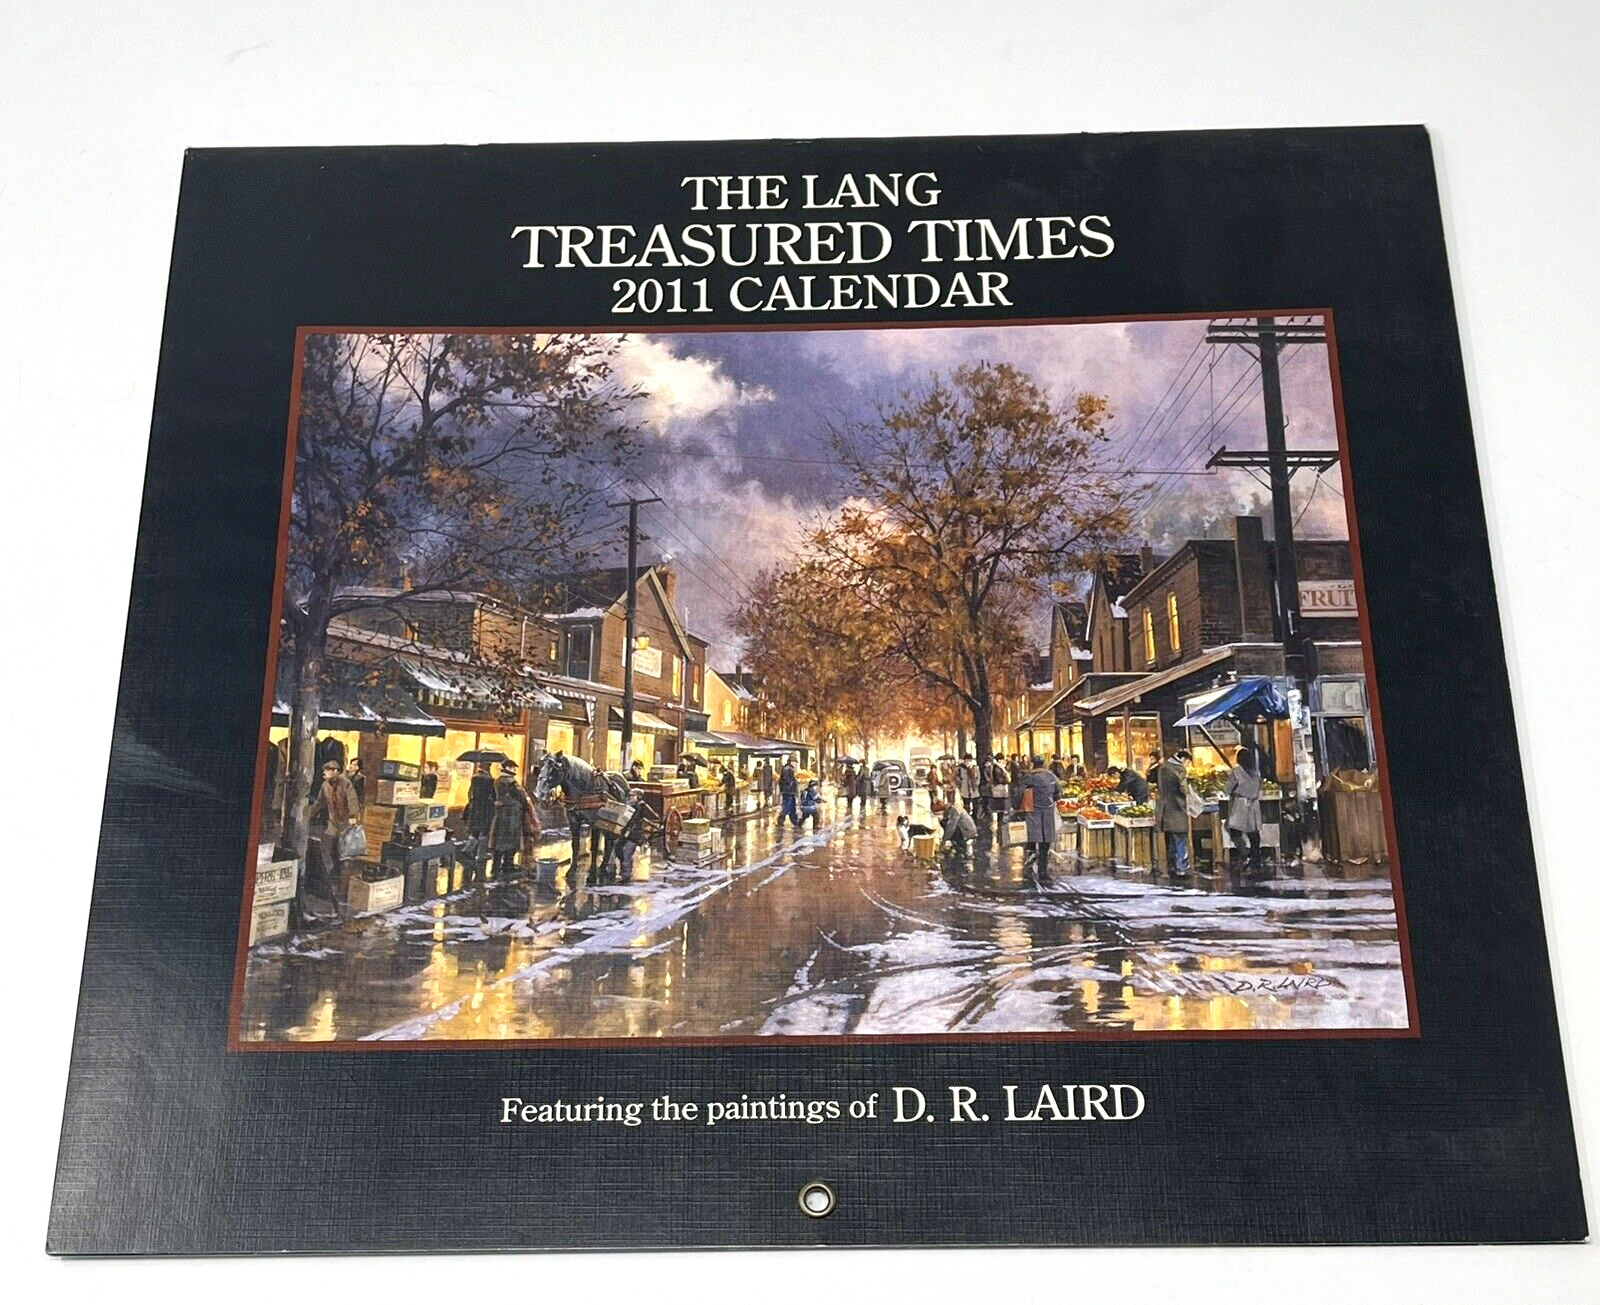 2015 Lang Wall Calendar Treasured Times Featuring The Paintings Of D.R. Laird